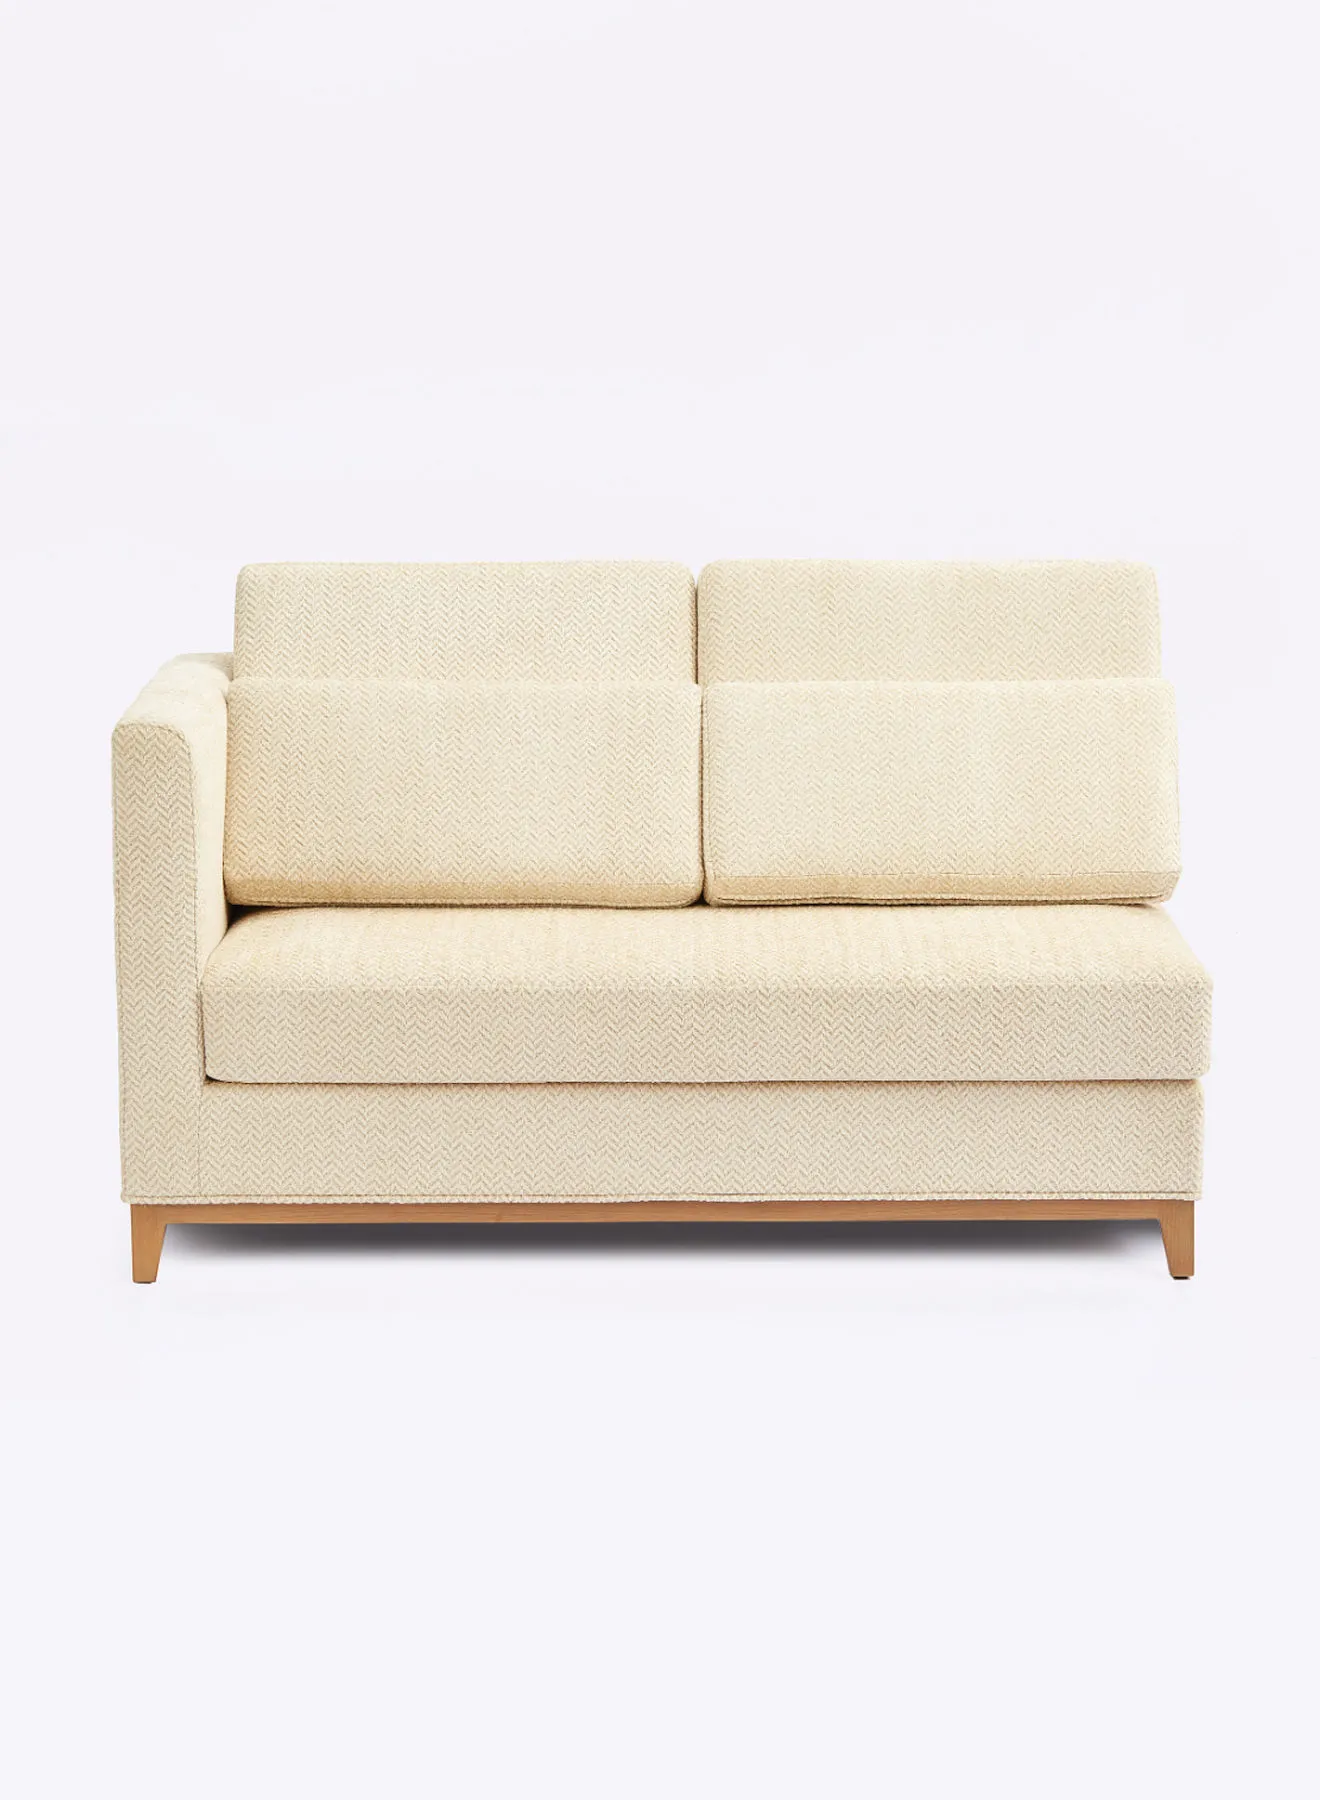 ebb & flow Sofa Luxurious - Upholstered Fabric Beige Wood Couch - 1380 X 790 X 760 - 2 Seater Sofa Relaxing Sofa